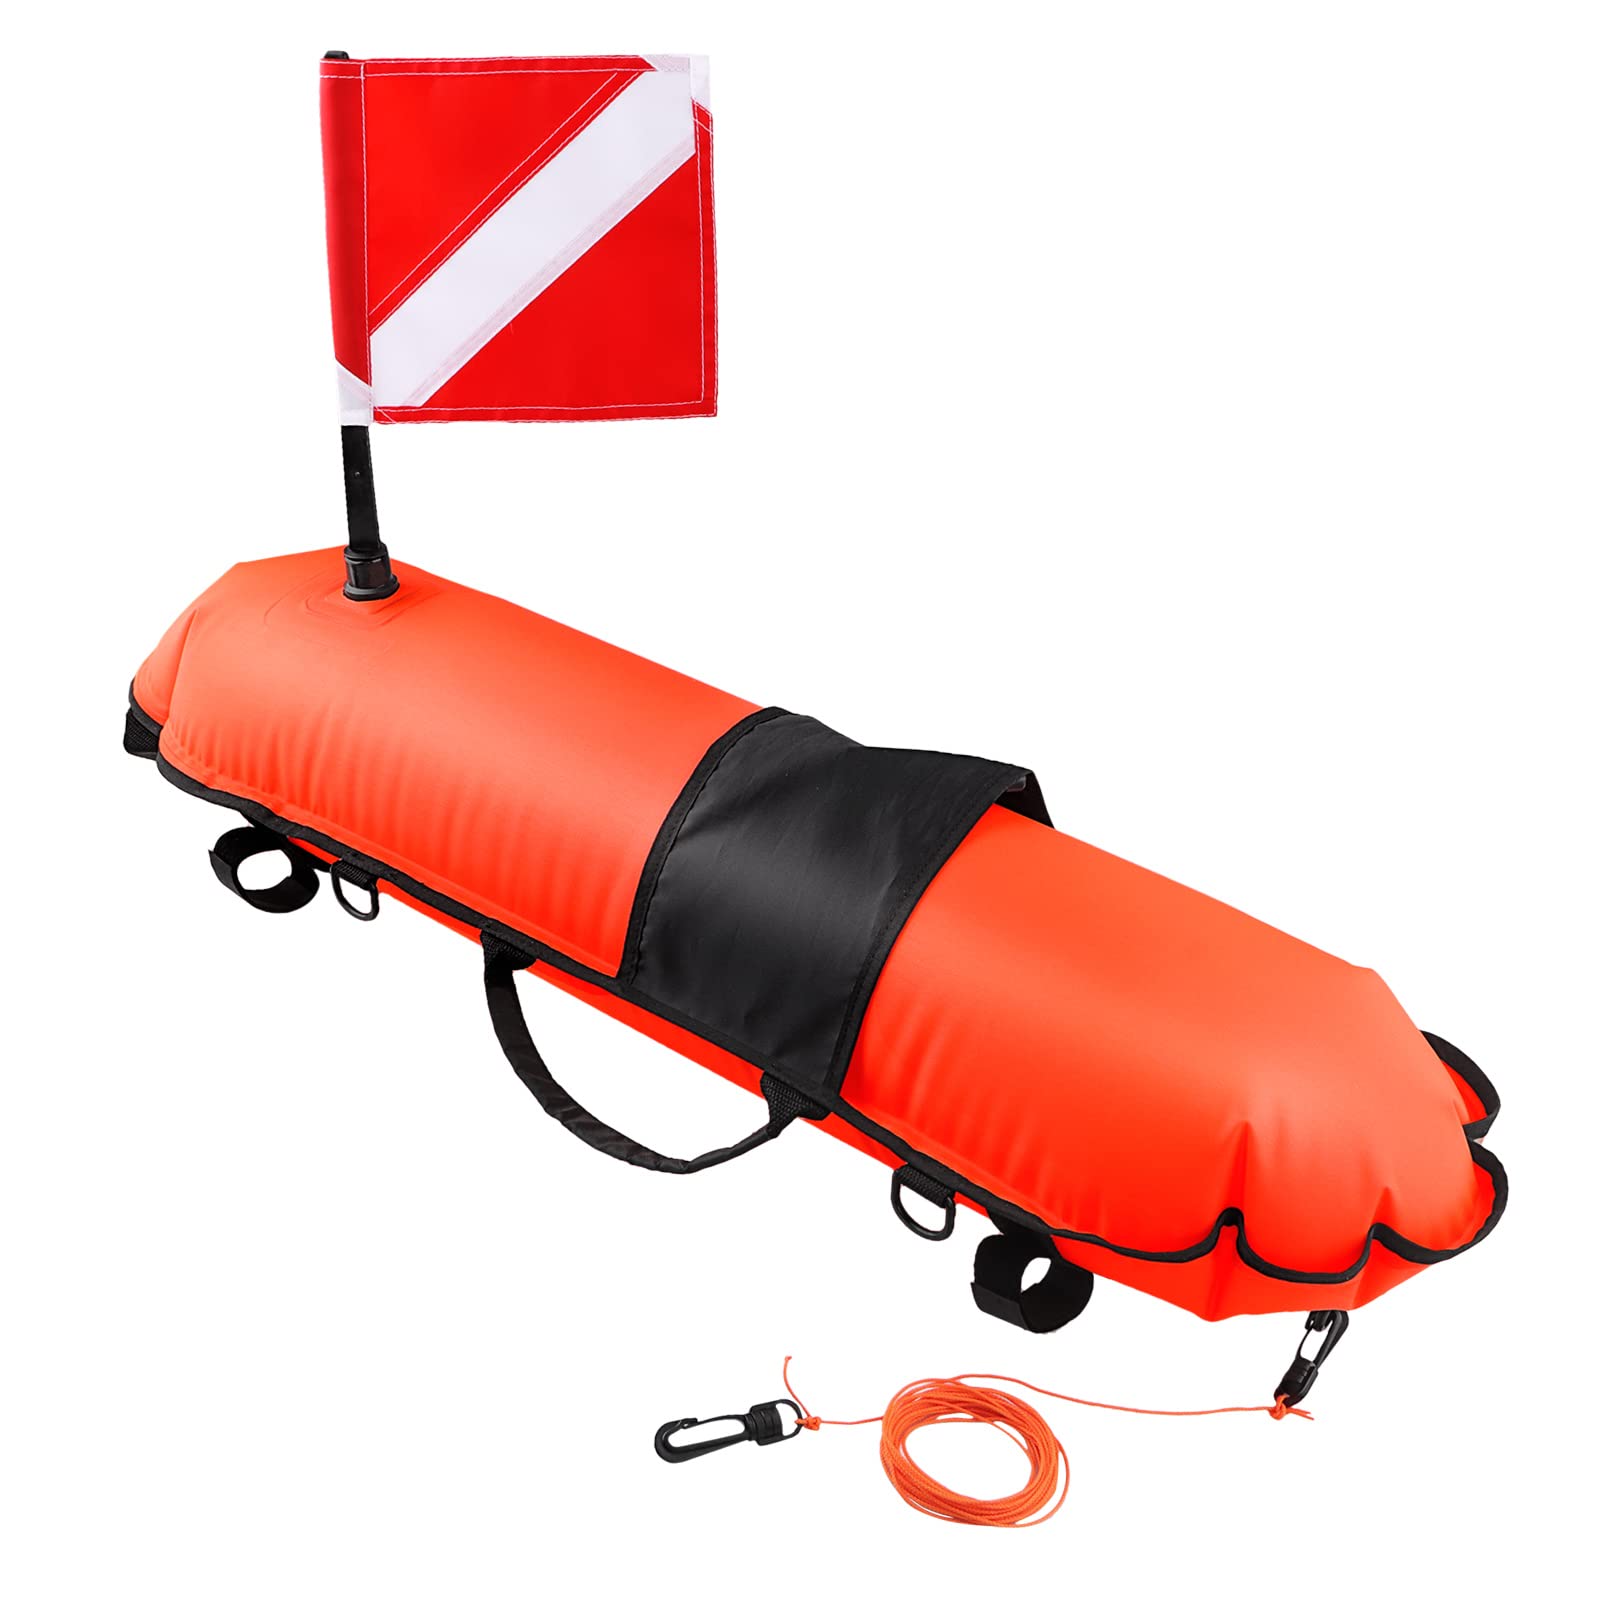 Owekfifv Safety Inflatable Scuba Diving Float Marker Buoy with Diver Down  Flag and 75ft Line for